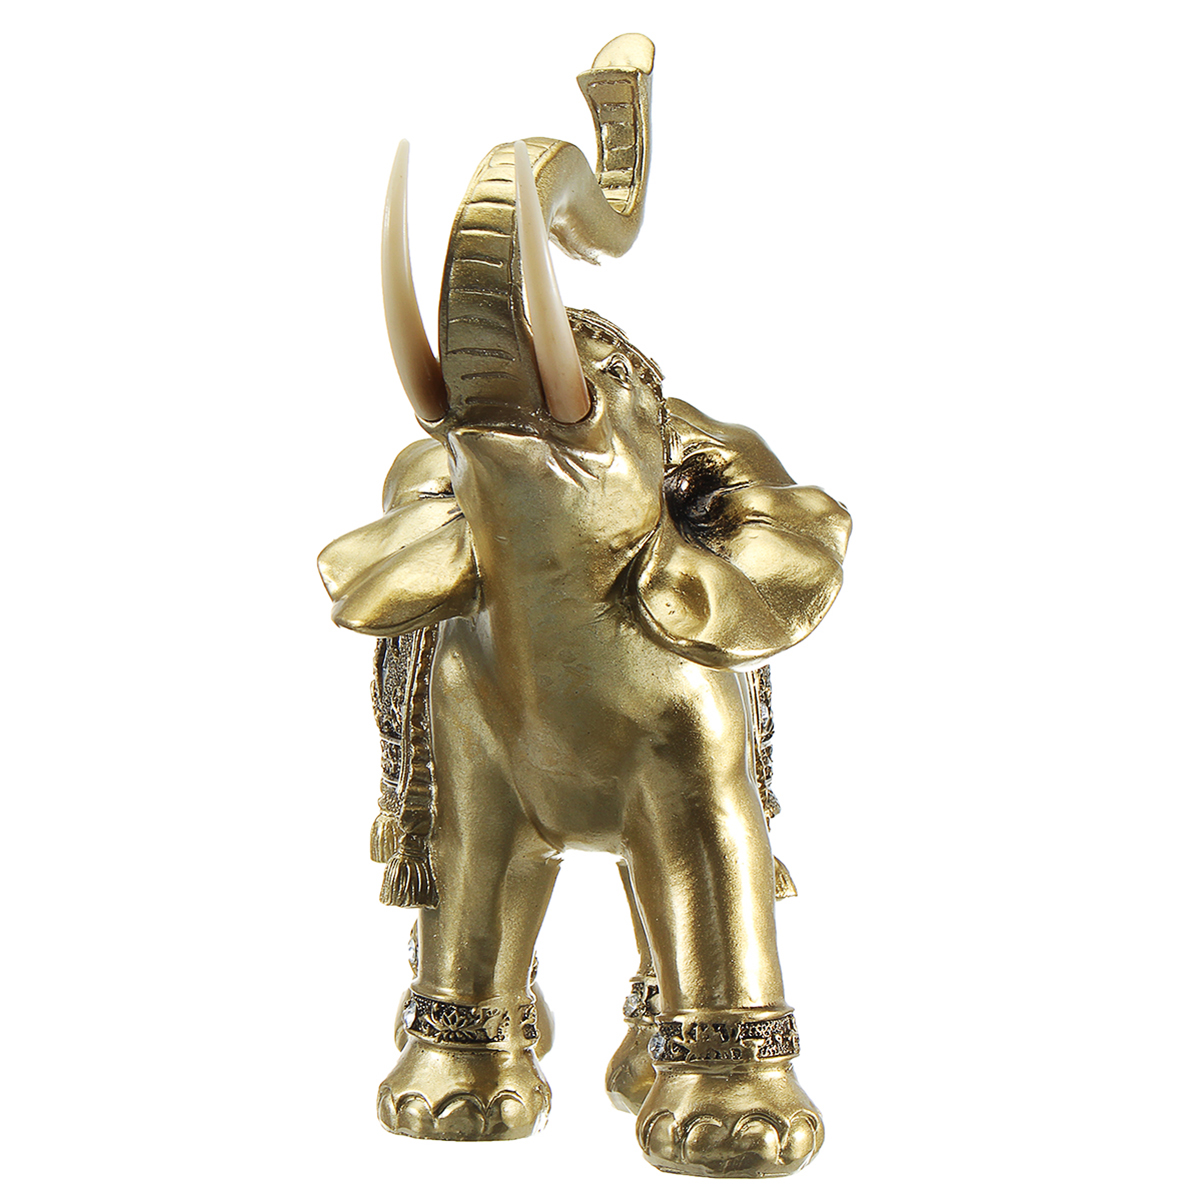 Lucky-Charm-Fengshui-Mascot-Golden-Elephant-Resin-Mini-Statue-Home-Desk-Ornaments-Gifts-Home-Decorat-1634232-9